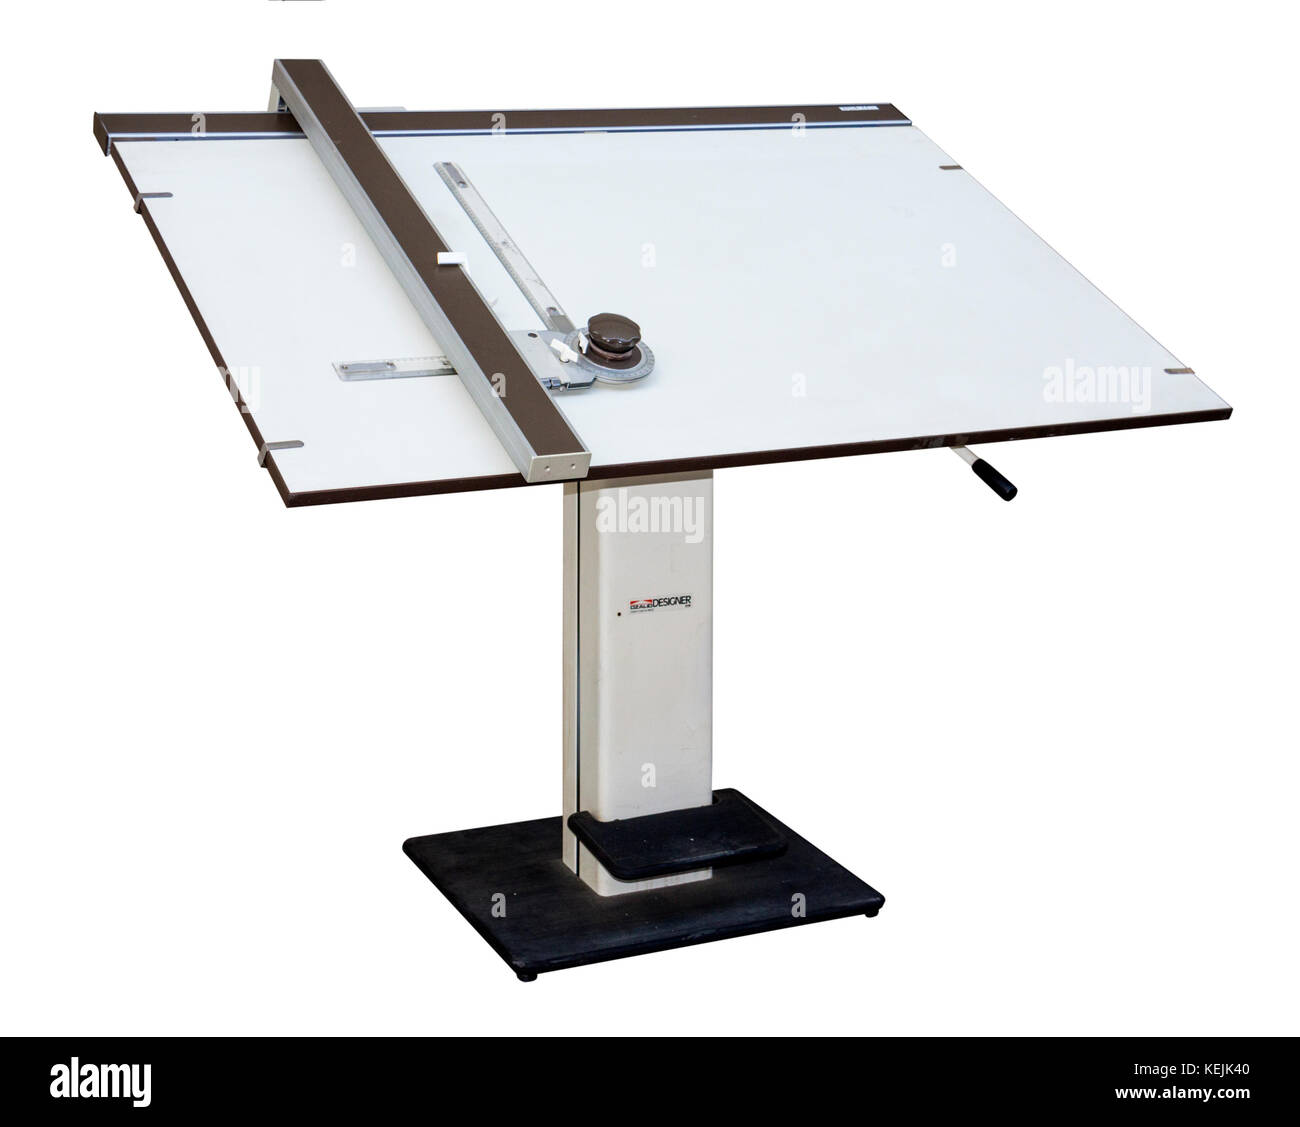 Precision Drafting Table